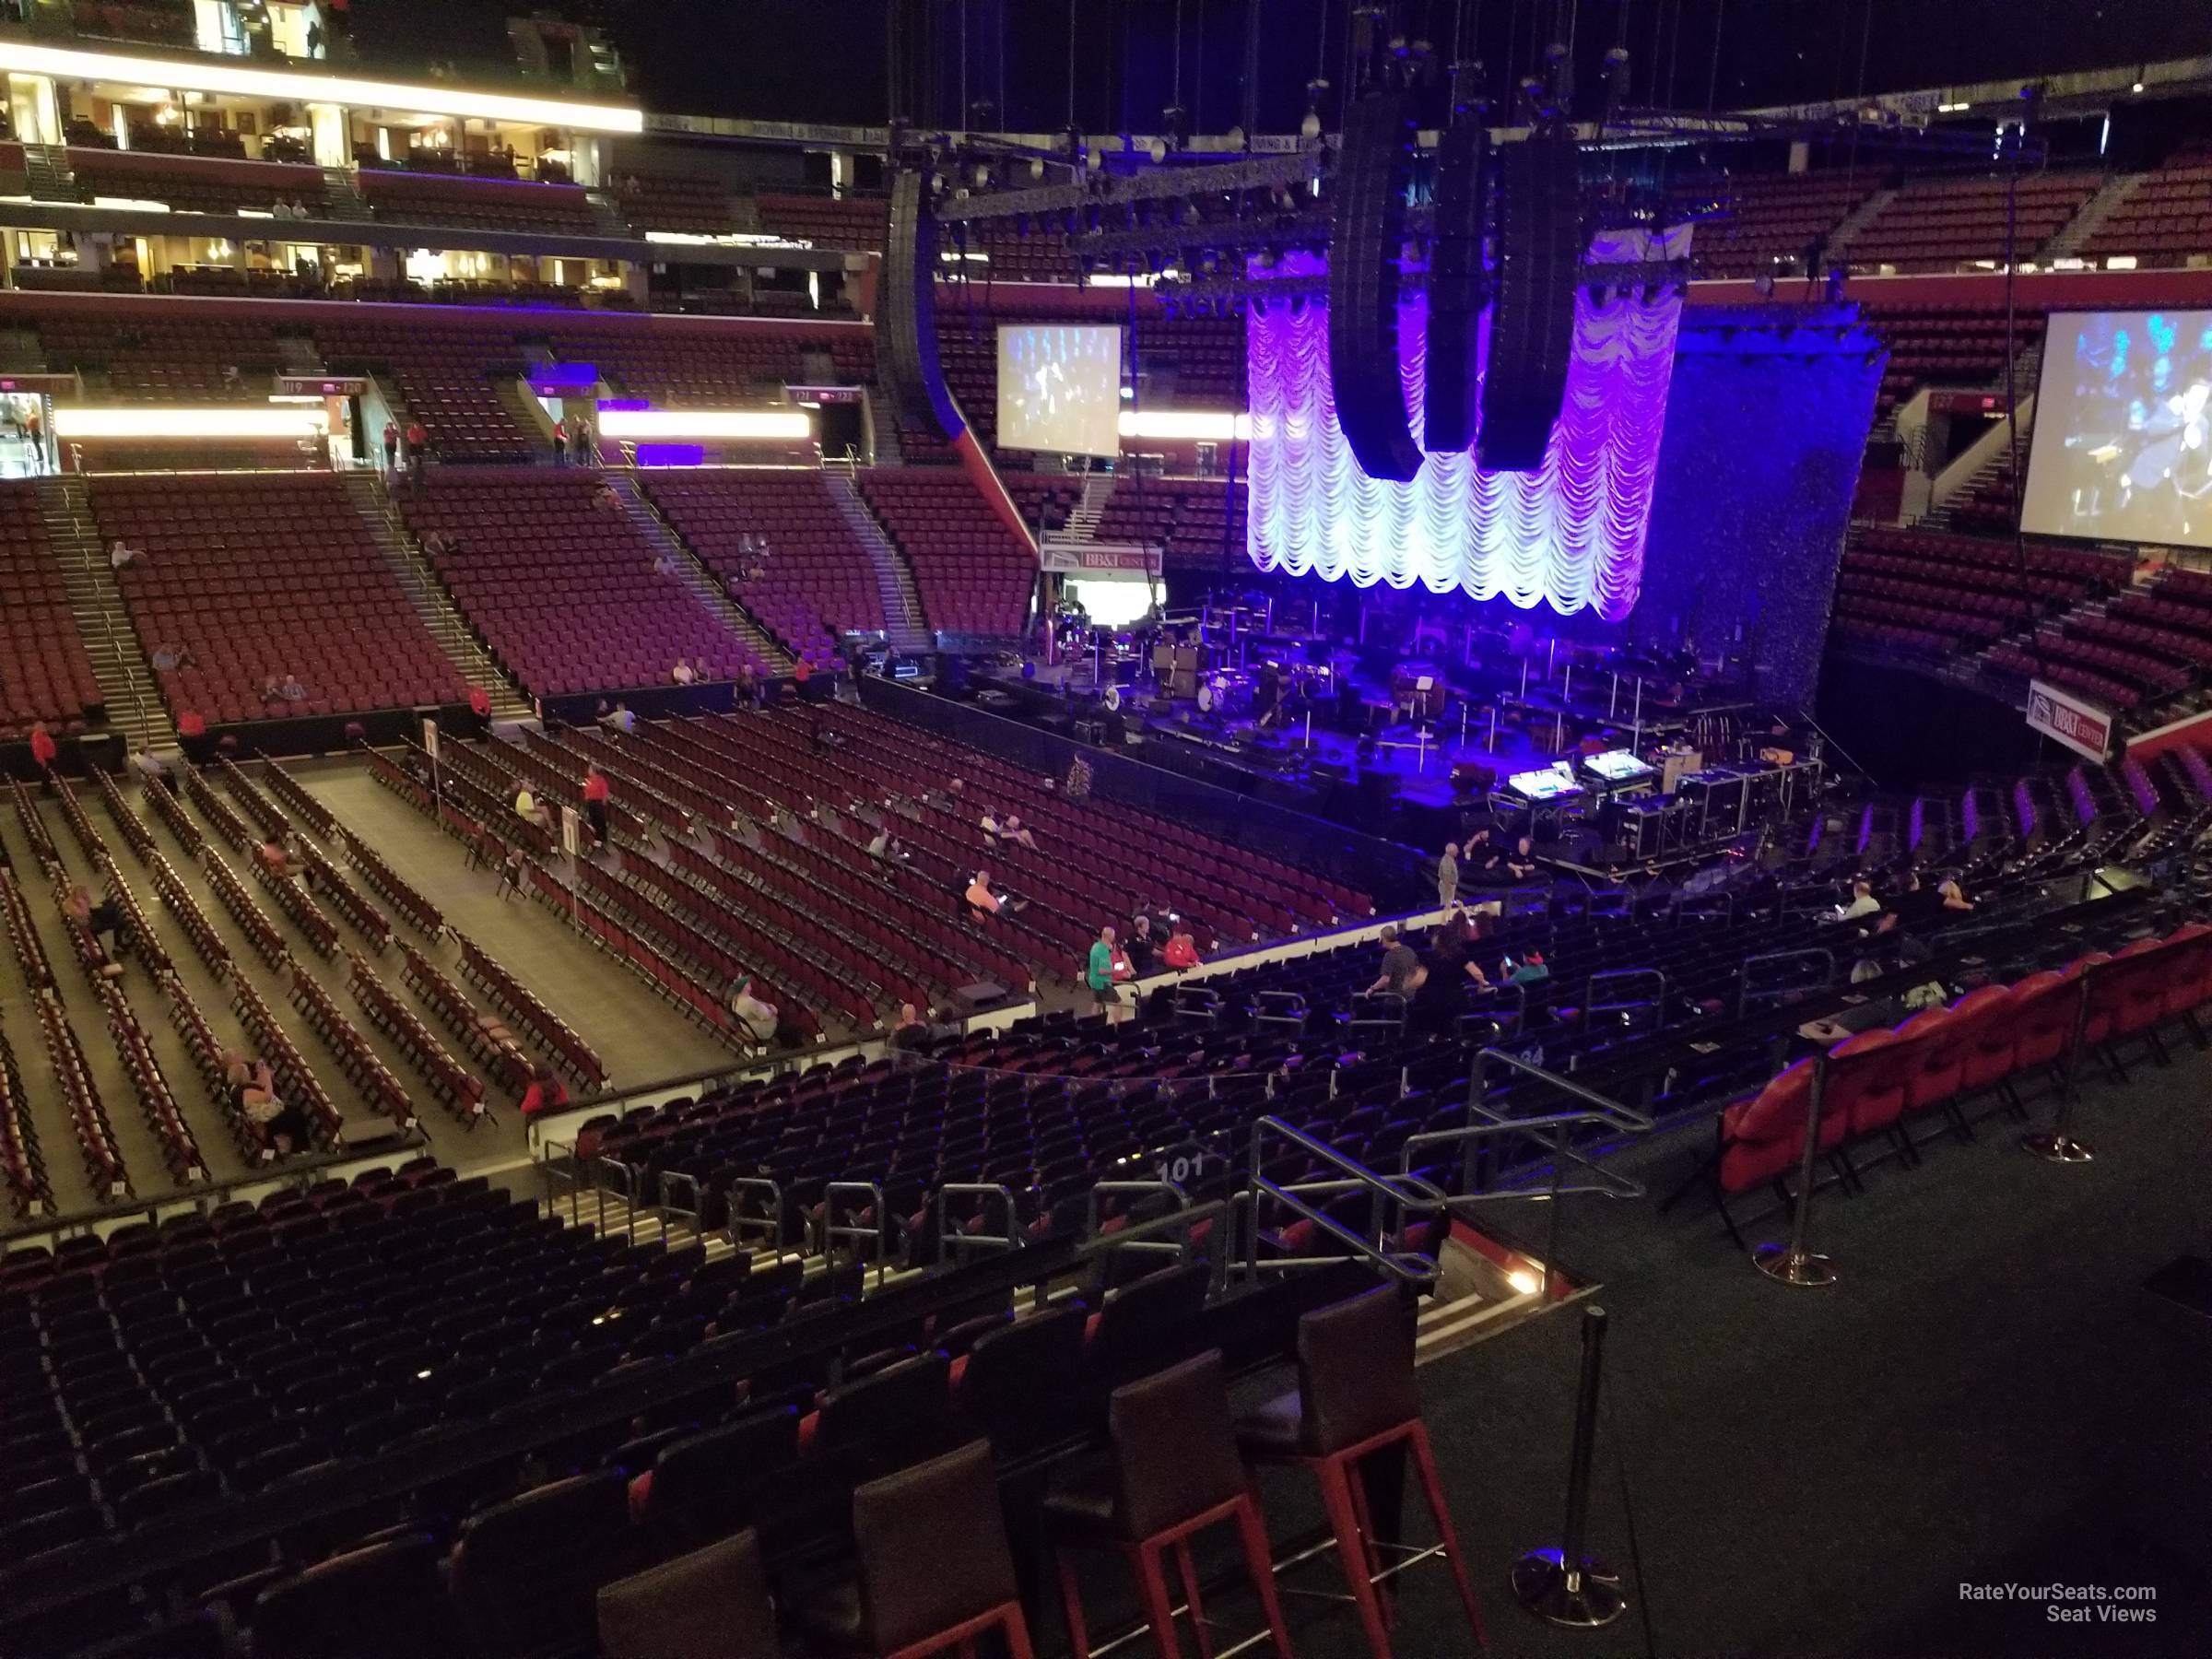 Section 101 at BB&T Center for Concerts